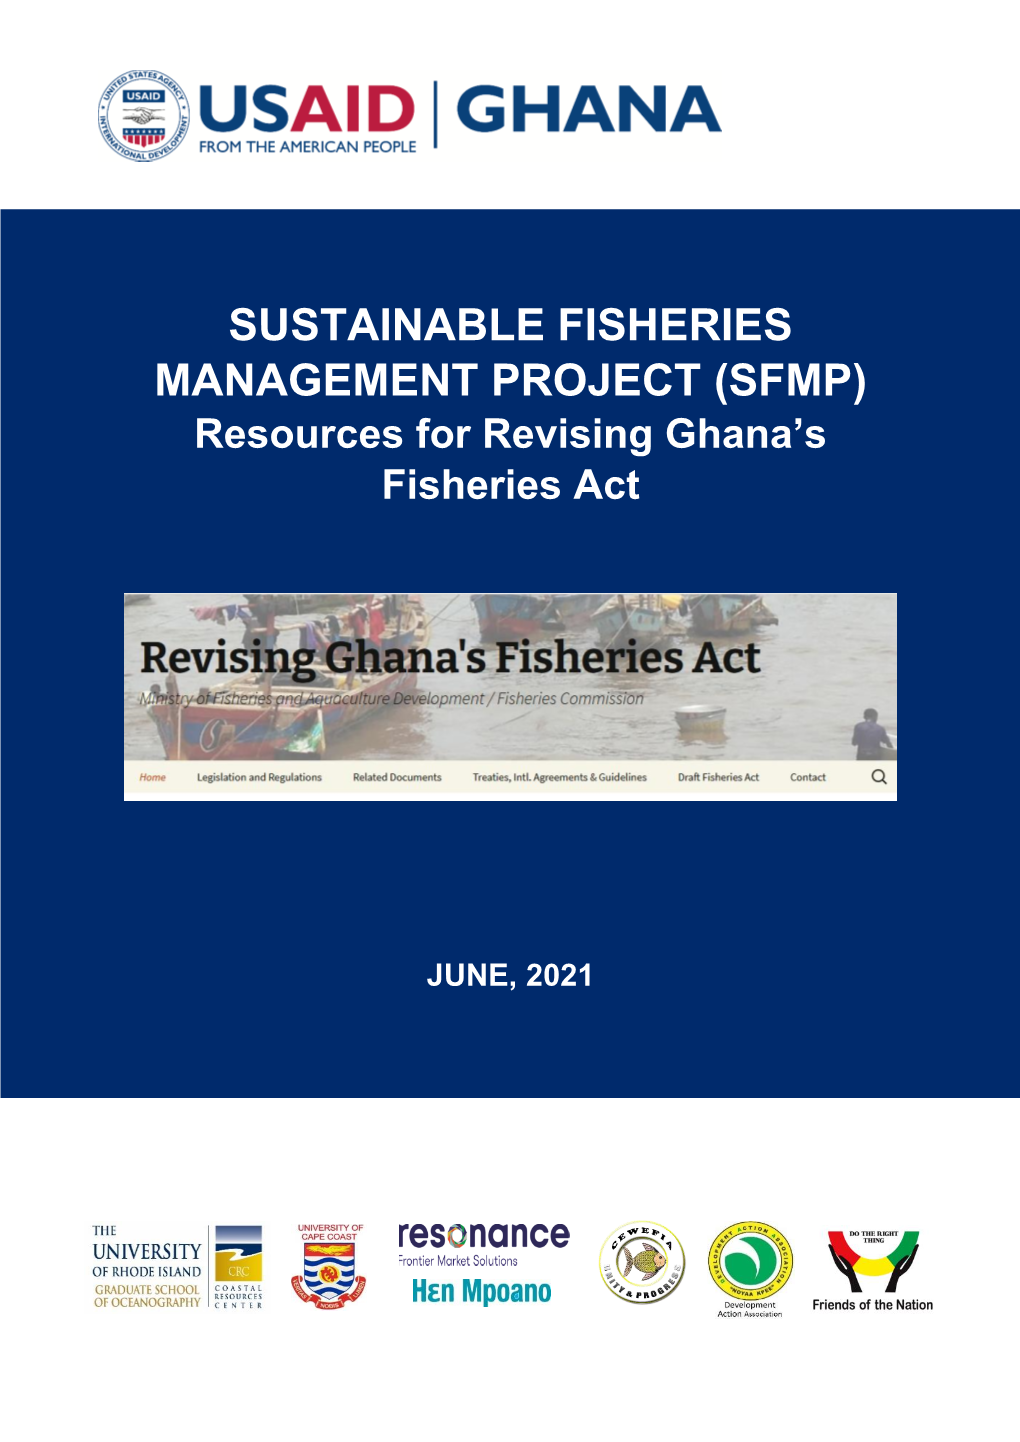 SUSTAINABLE FISHERIES MANAGEMENT PROJECT (SFMP) Resources for Revising Ghana’S